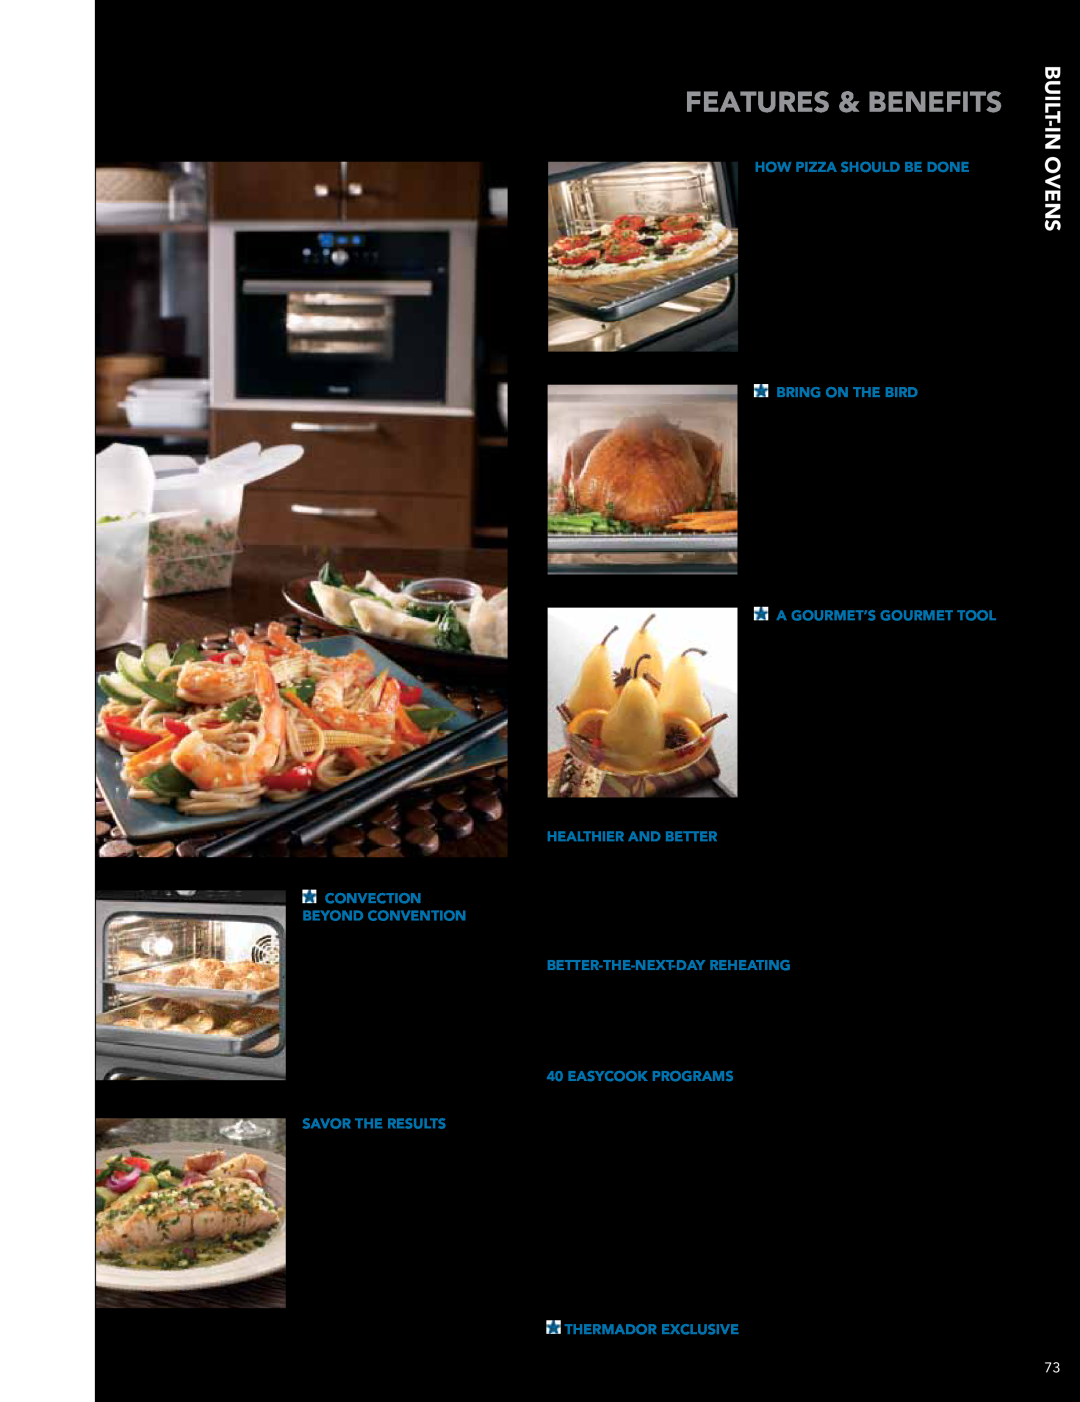 Thermador PODMW301J, DWHD651JFP manual Masterpiece Series, Steam And Convection Features & Benefits, Built-In Ovens 